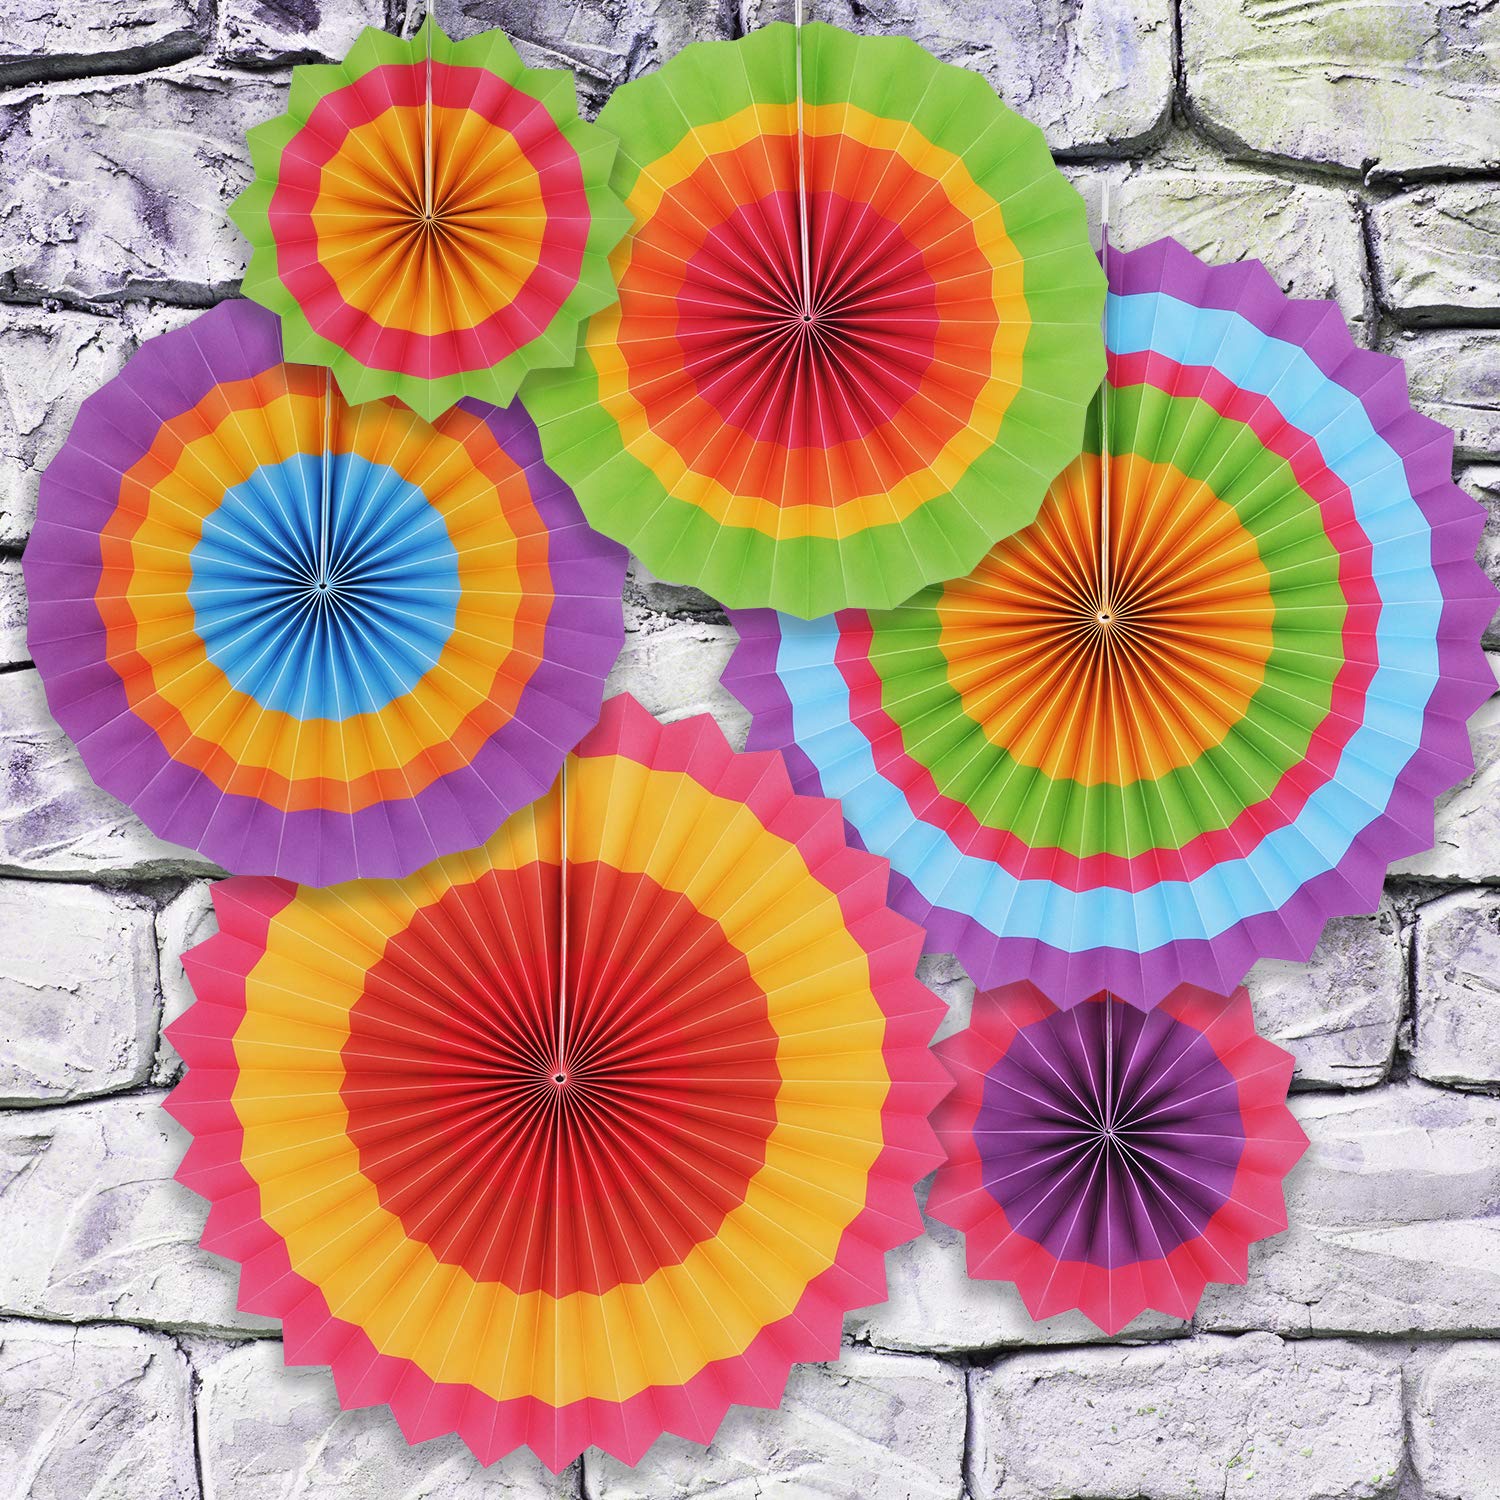 JOYIN 24 Colorful Hanging Paper Fan Round Wheel Disc for Fiesta Party Supplies Decoration, Luau Event Photo Props, Cinco De Mayo Mexican Festivals, Carnivals, Taco Tuesday Event.